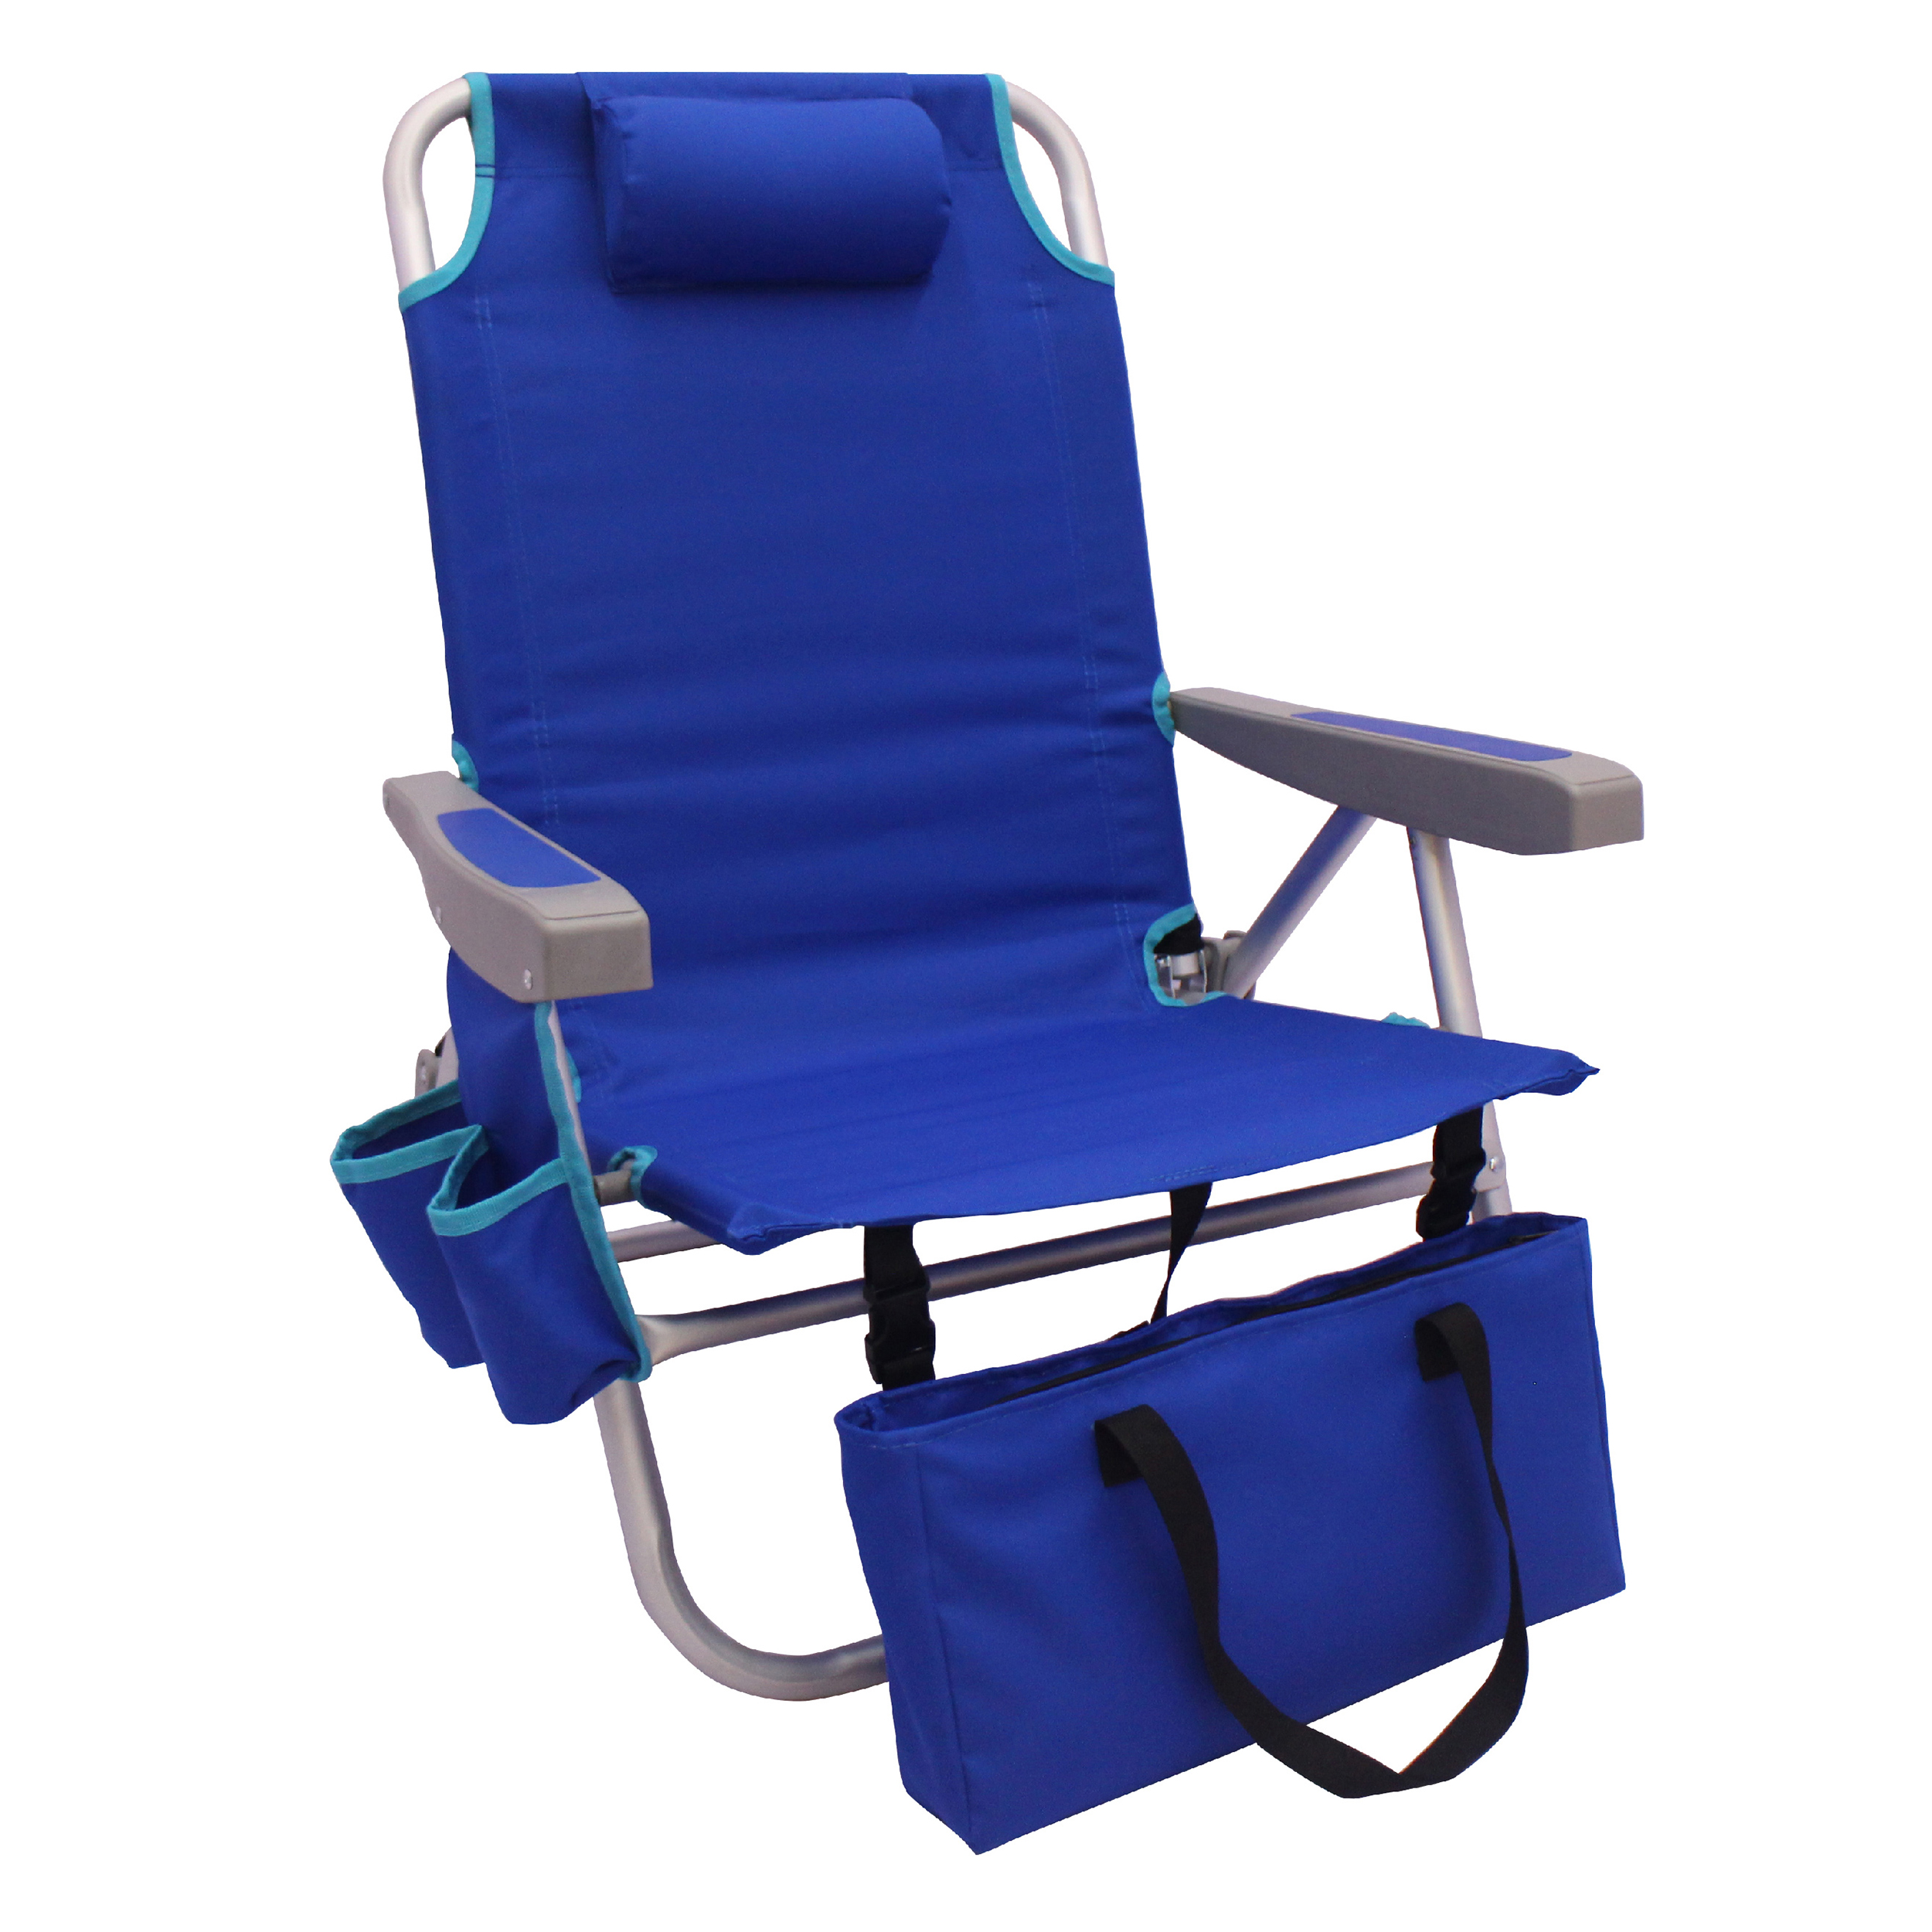 Mainstays Backpack Aluminum Beach Chair - Blue/Gray - image 1 of 3